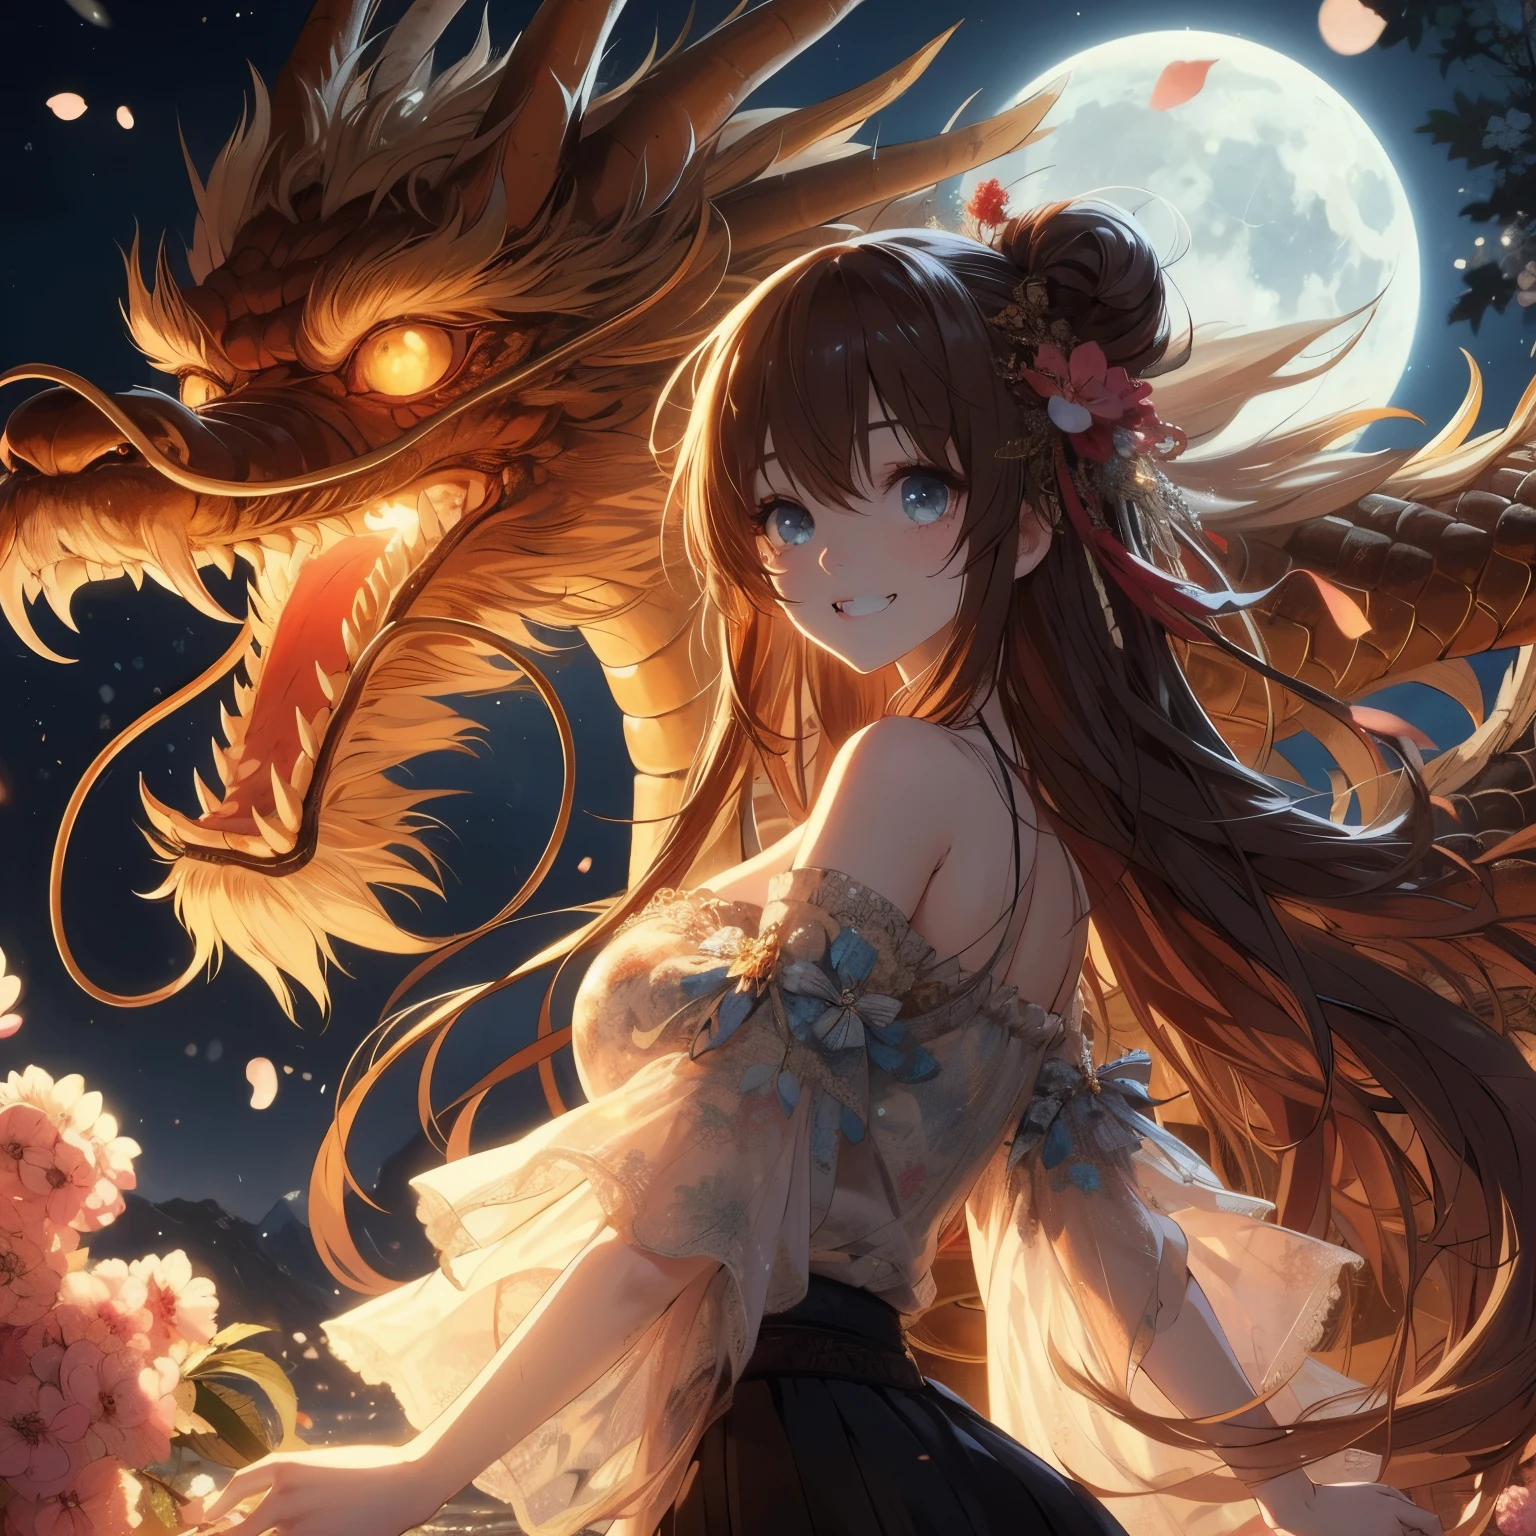 a girl with long hair and a dragon head is standing in front of a full moon, anime style 4 k, anime art wallpaper 8 k, anime art wallpaper 4 k, anime art wallpaper 4k, 4k anime wallpaper, anime wallpaper 4k, anime wallpaper 4 k, 4 k manga wallpaper, anime fantasy artwork, hd anime wallaper, beautiful fantasy anime